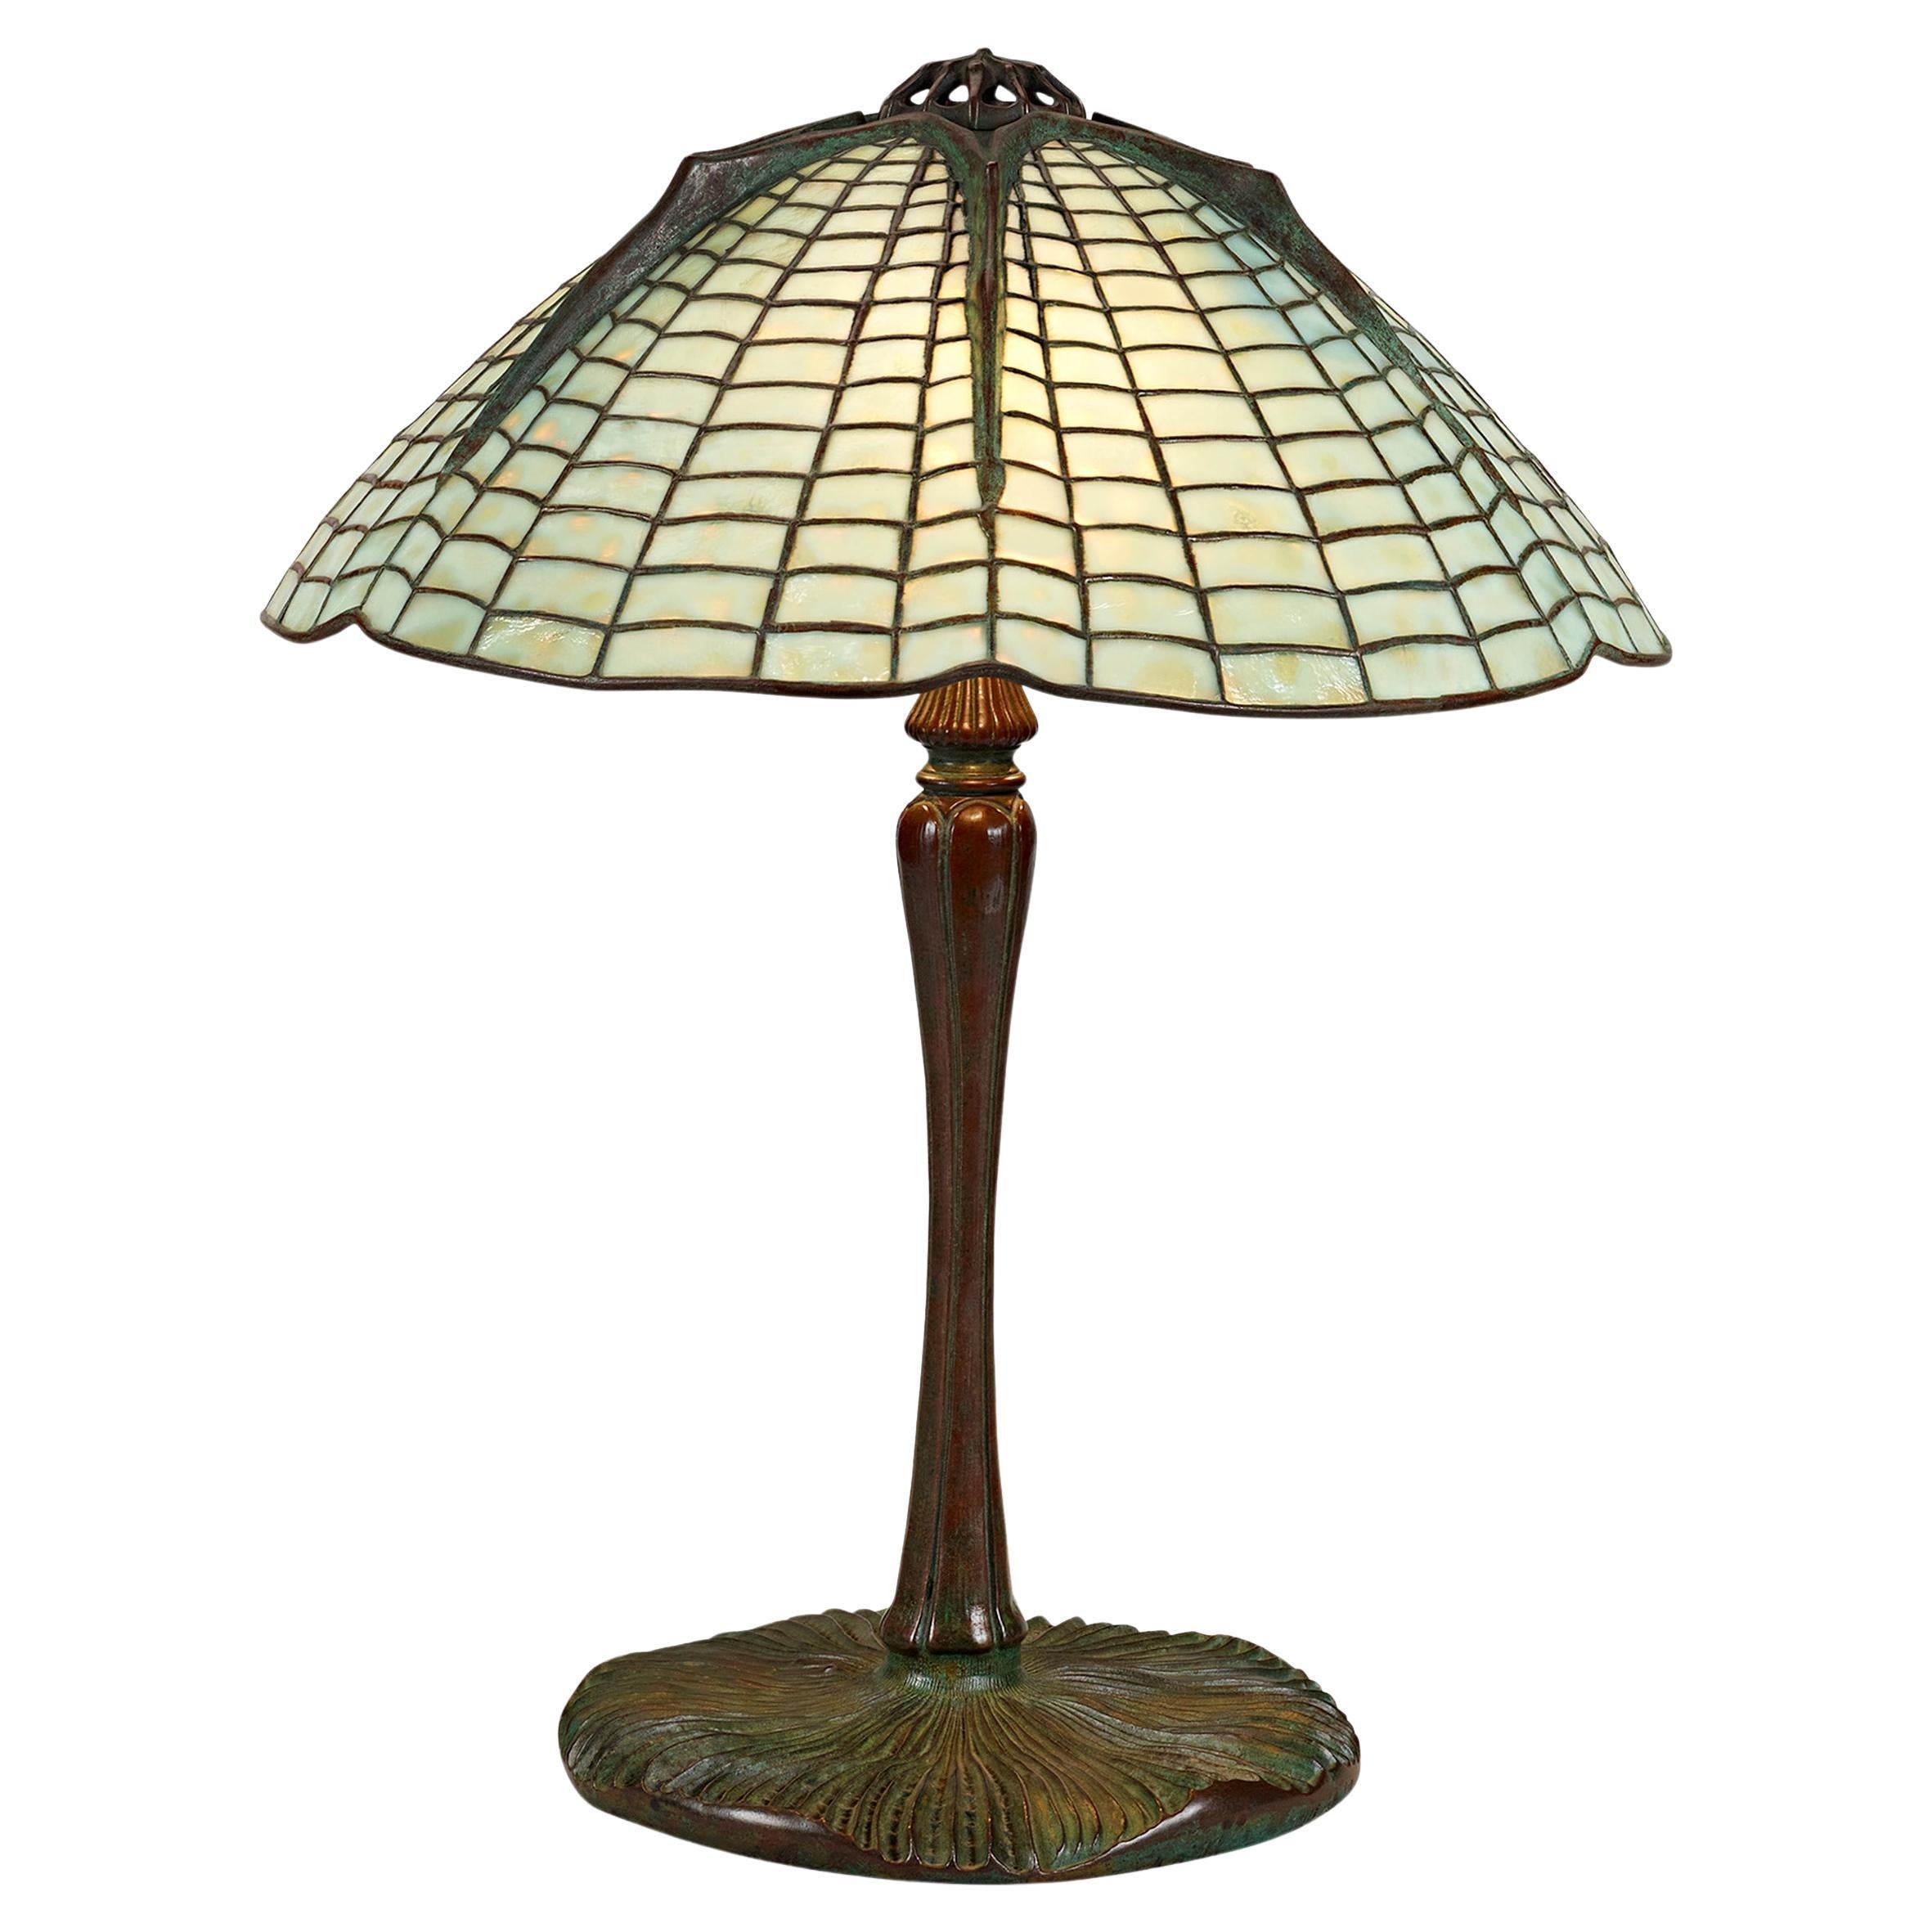 How can I tell if a Tiffany lamp is real or not?